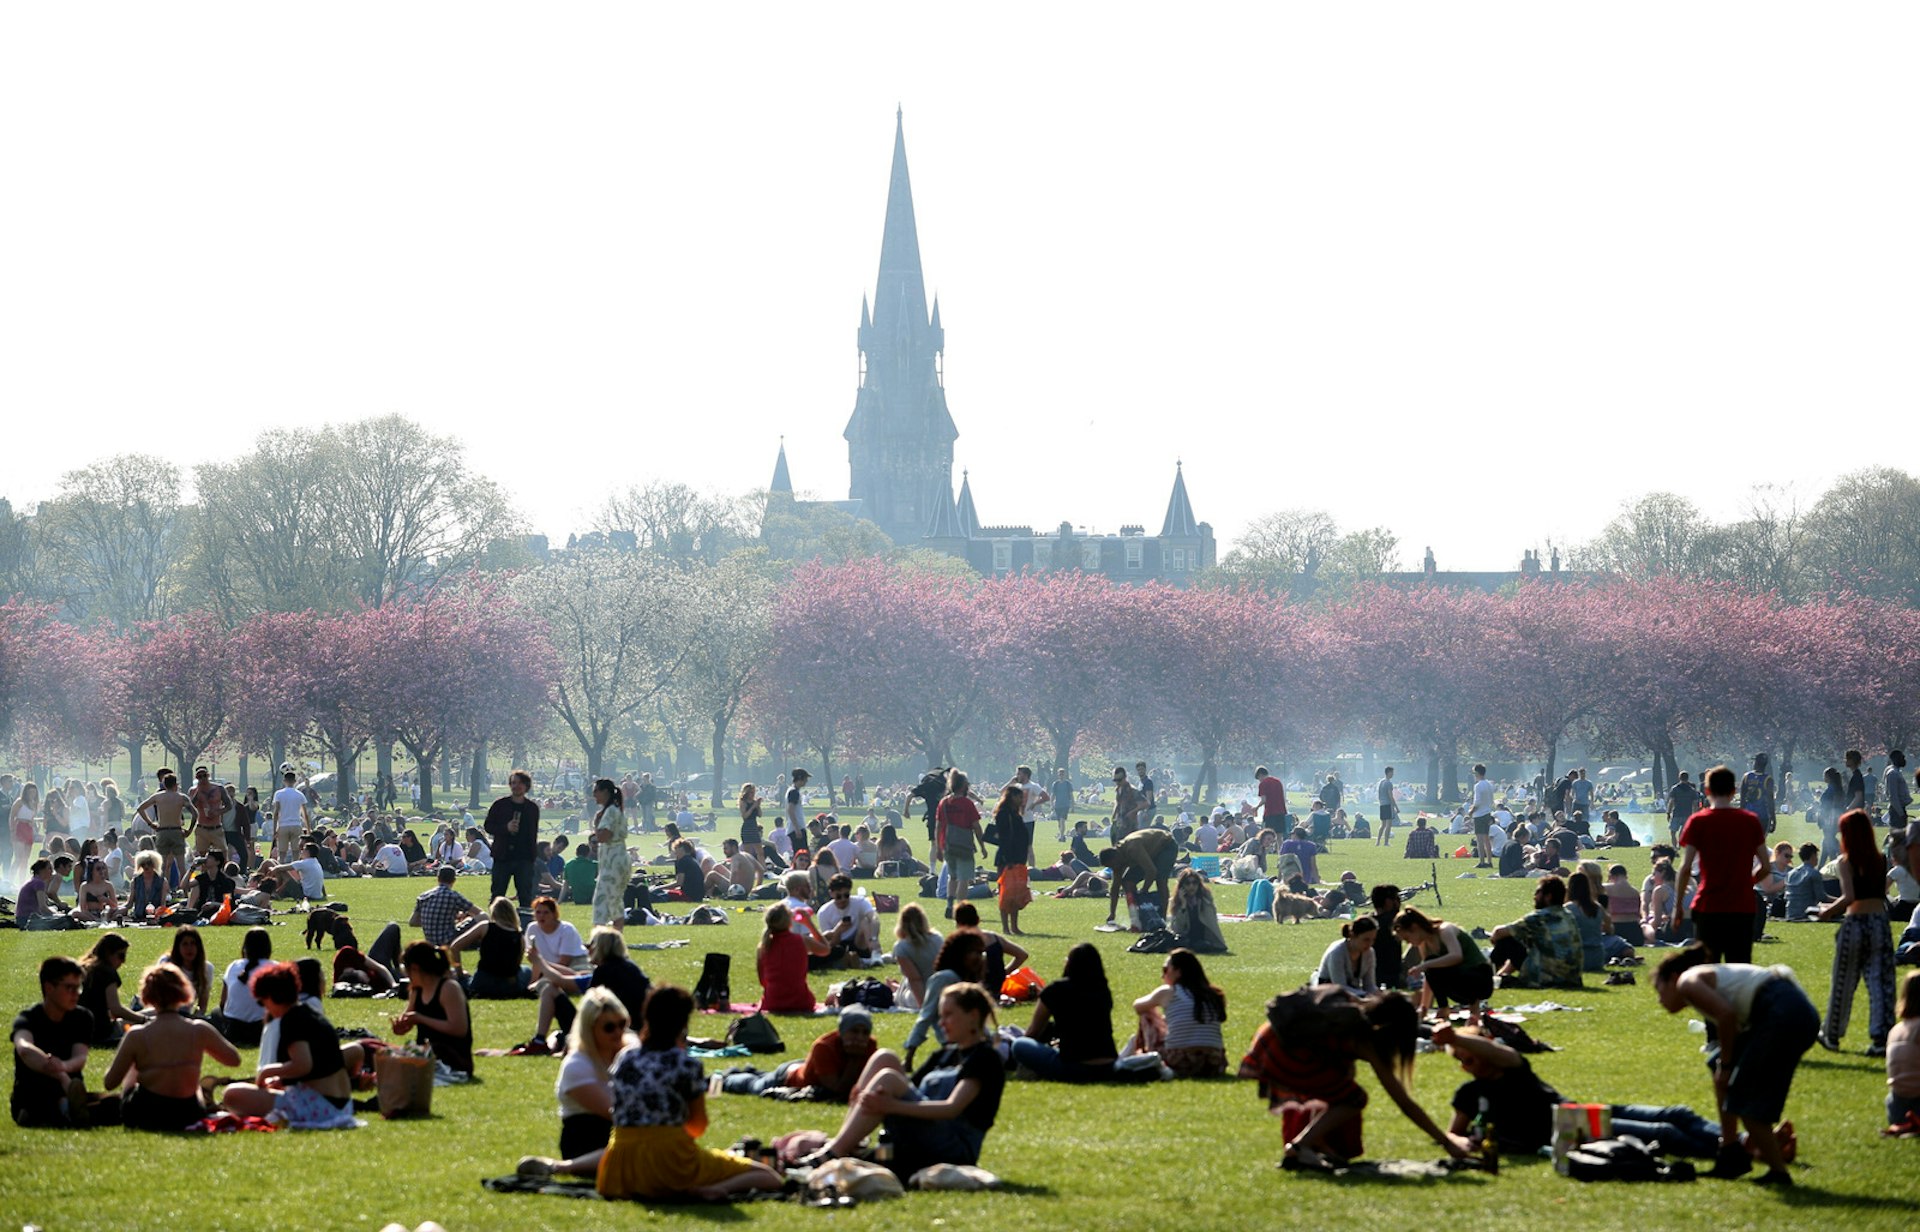 People enjoy the sunshine in The Meadows, Edinburgh. There is smoke from barbecues dotted around the park, there are cherry blossom trees blooming in the background and lots of people sitting on the grass in groups. A church steeple is visible in the background. 